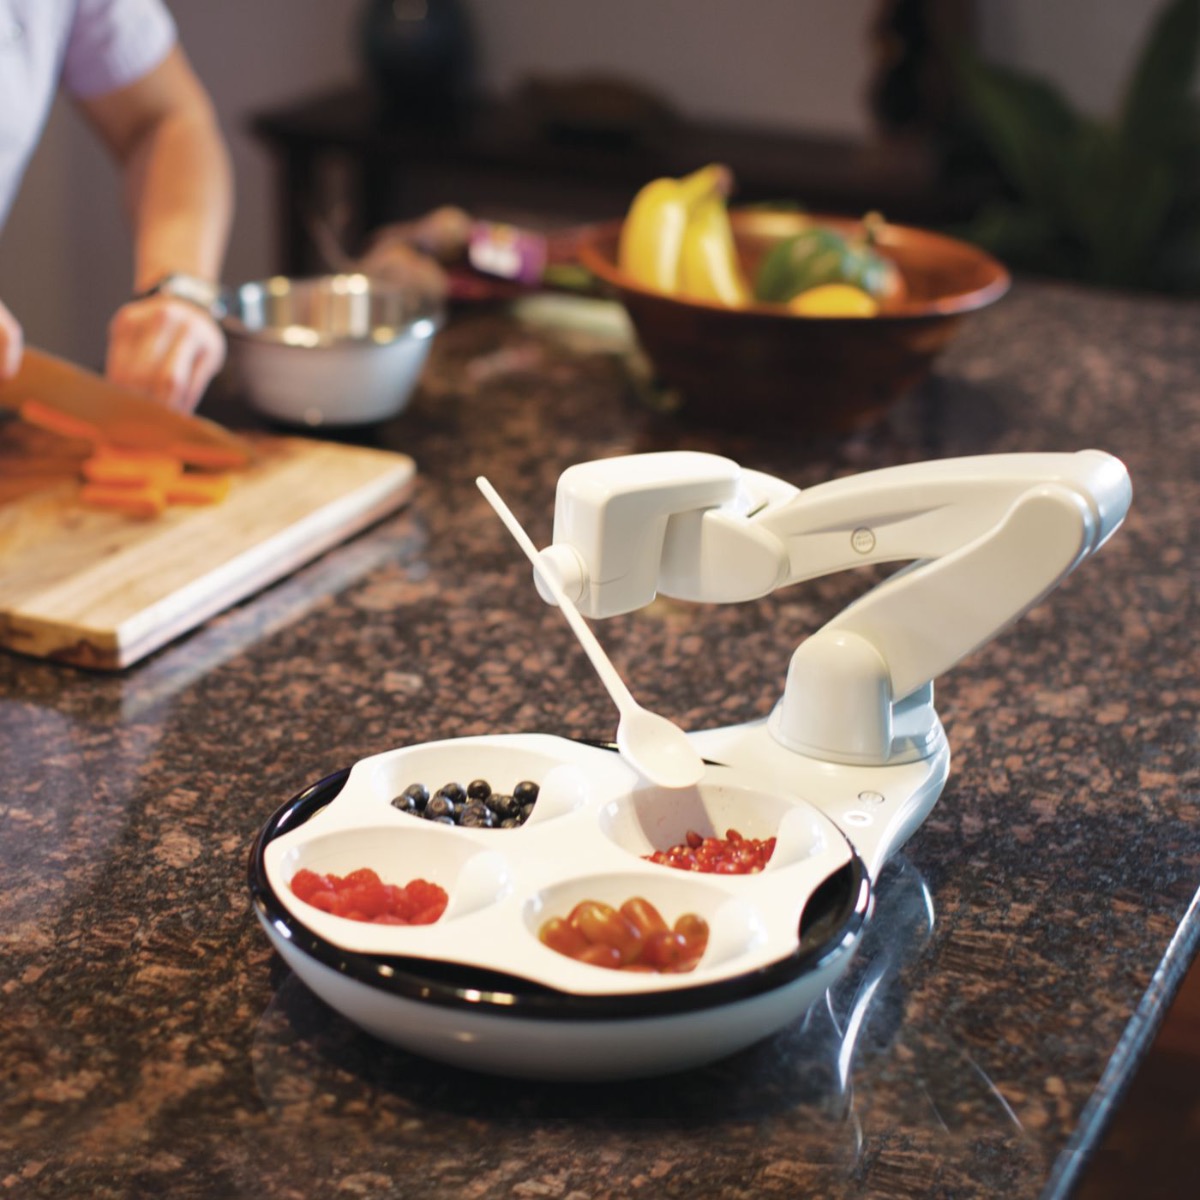 Obi feeding device for assisted dining